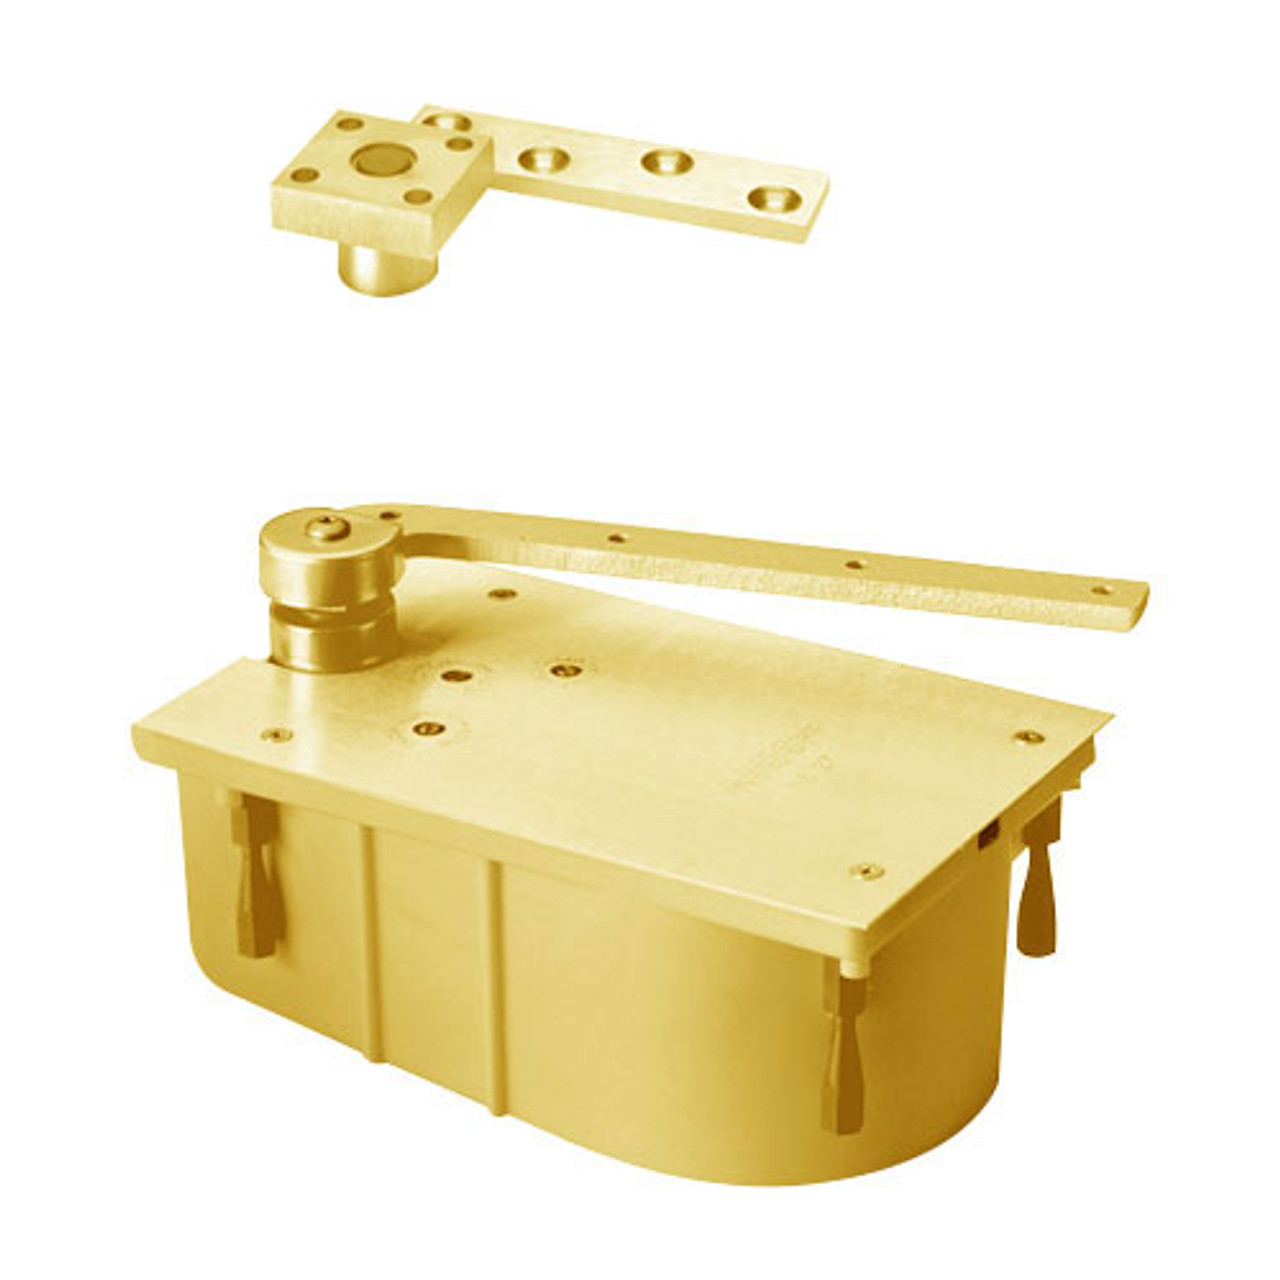 427-95S-LFP-CWF-LH-605 Rixson 427 Series Heavy Duty 3/4" Offset Hung Floor Closer in Bright Brass Finish